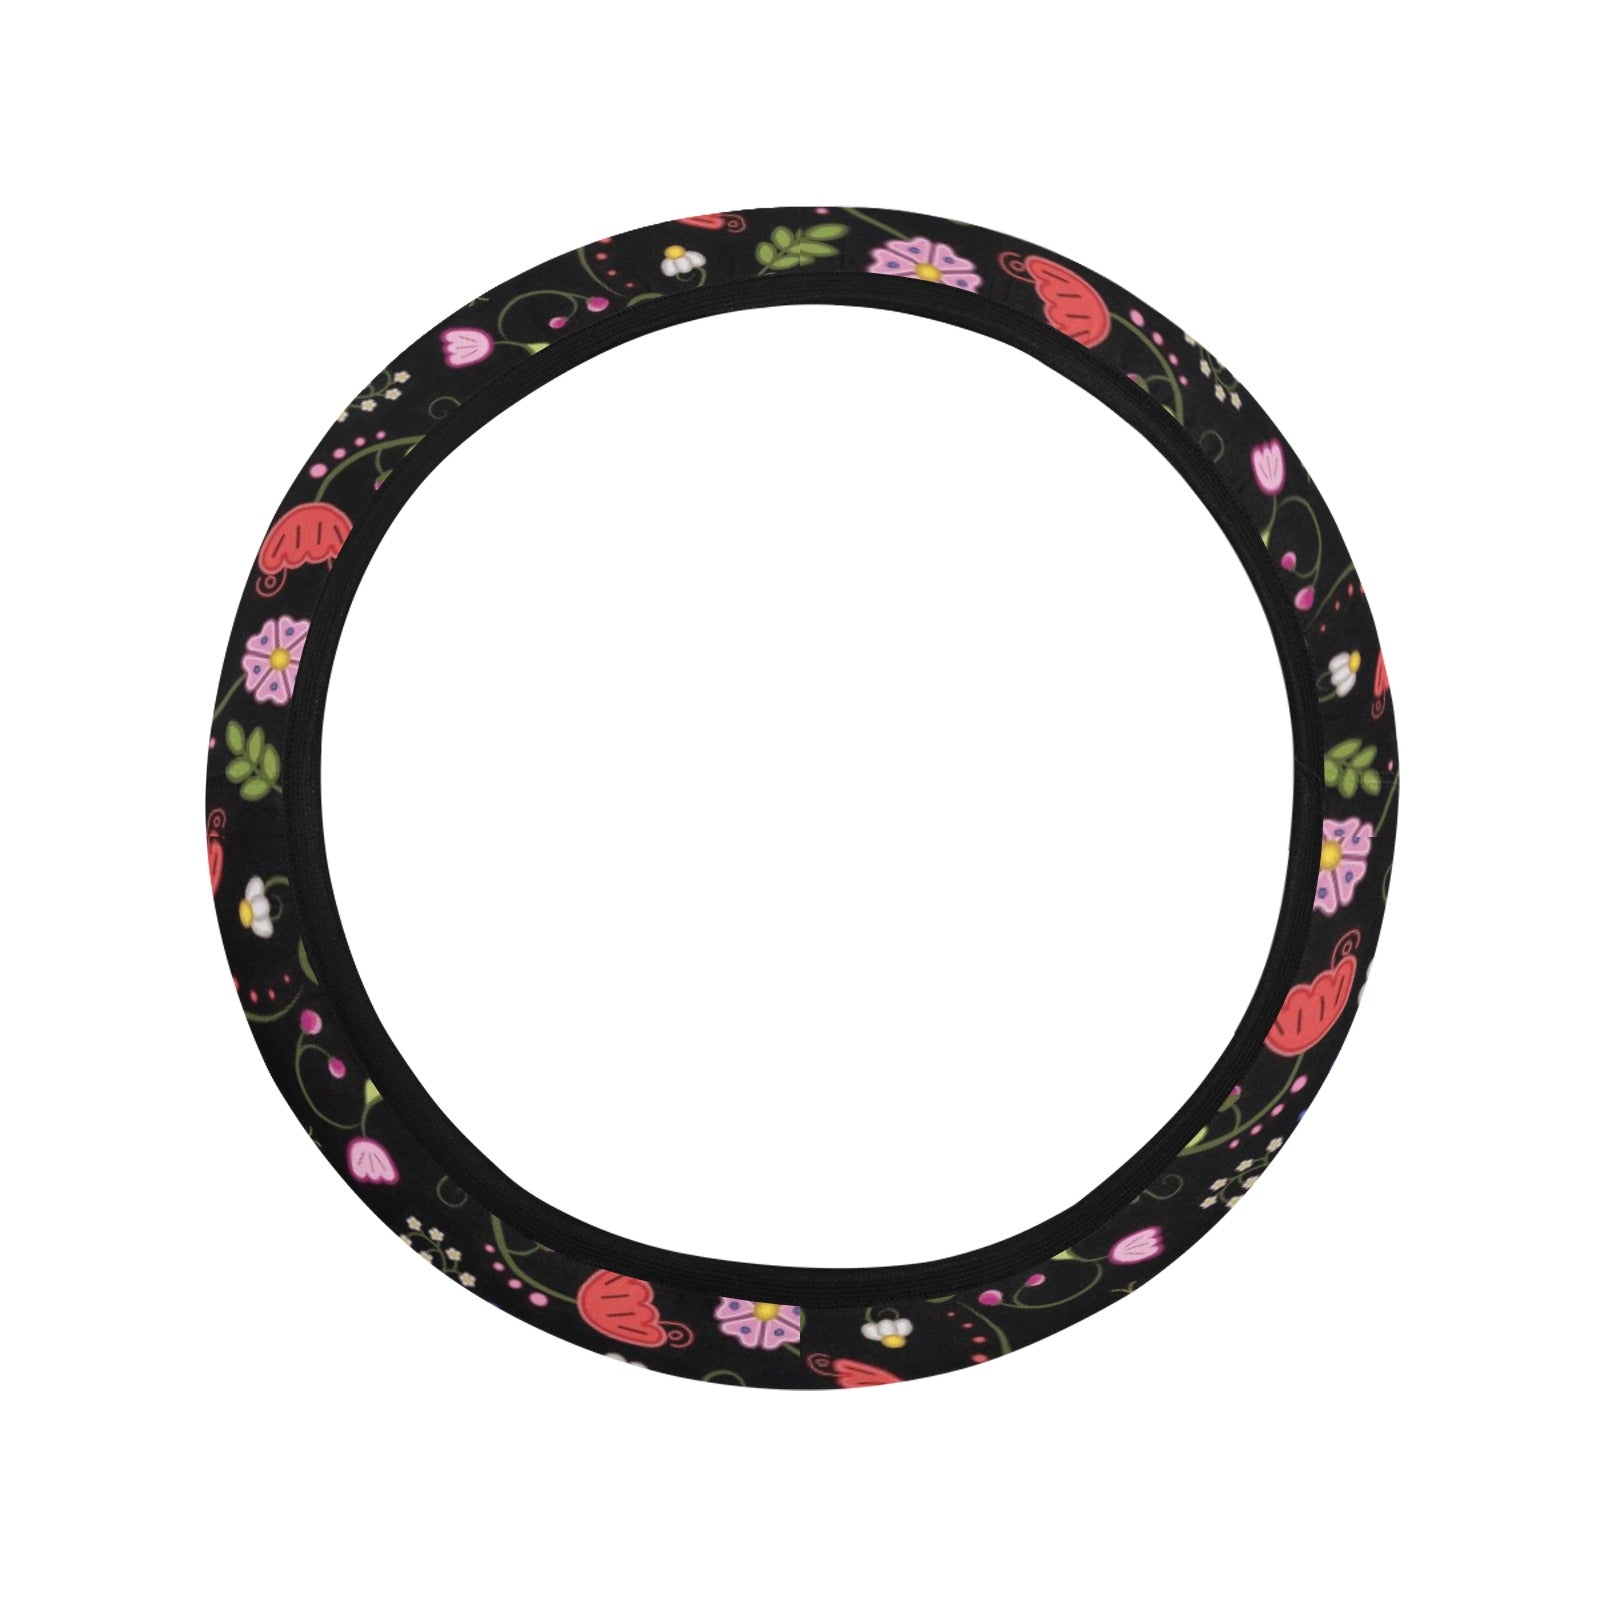 Nipin Blossom Midnight Steering Wheel Cover with Elastic Edge